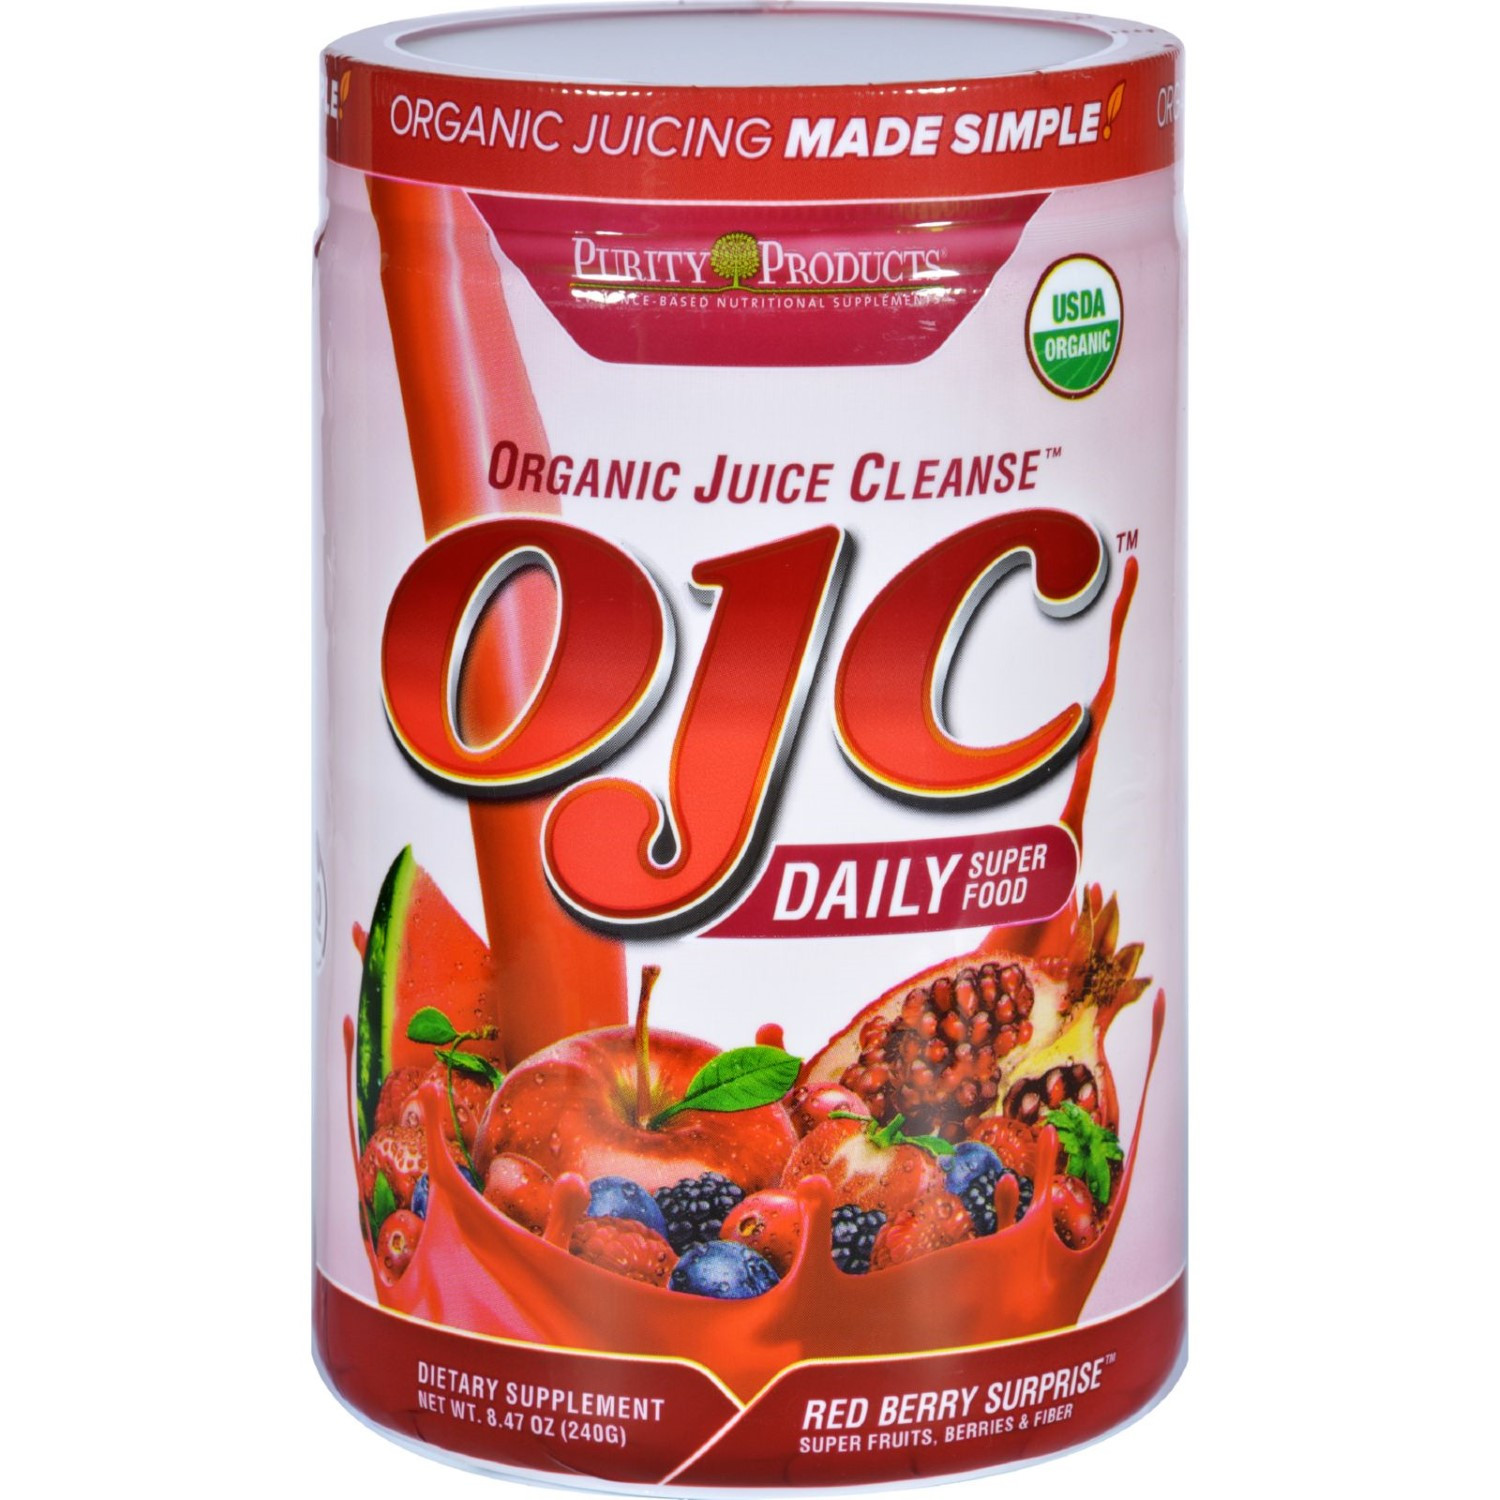 Organic Juice Cleanse
 OJC Purity Products Organic Juice Cleanse Certified